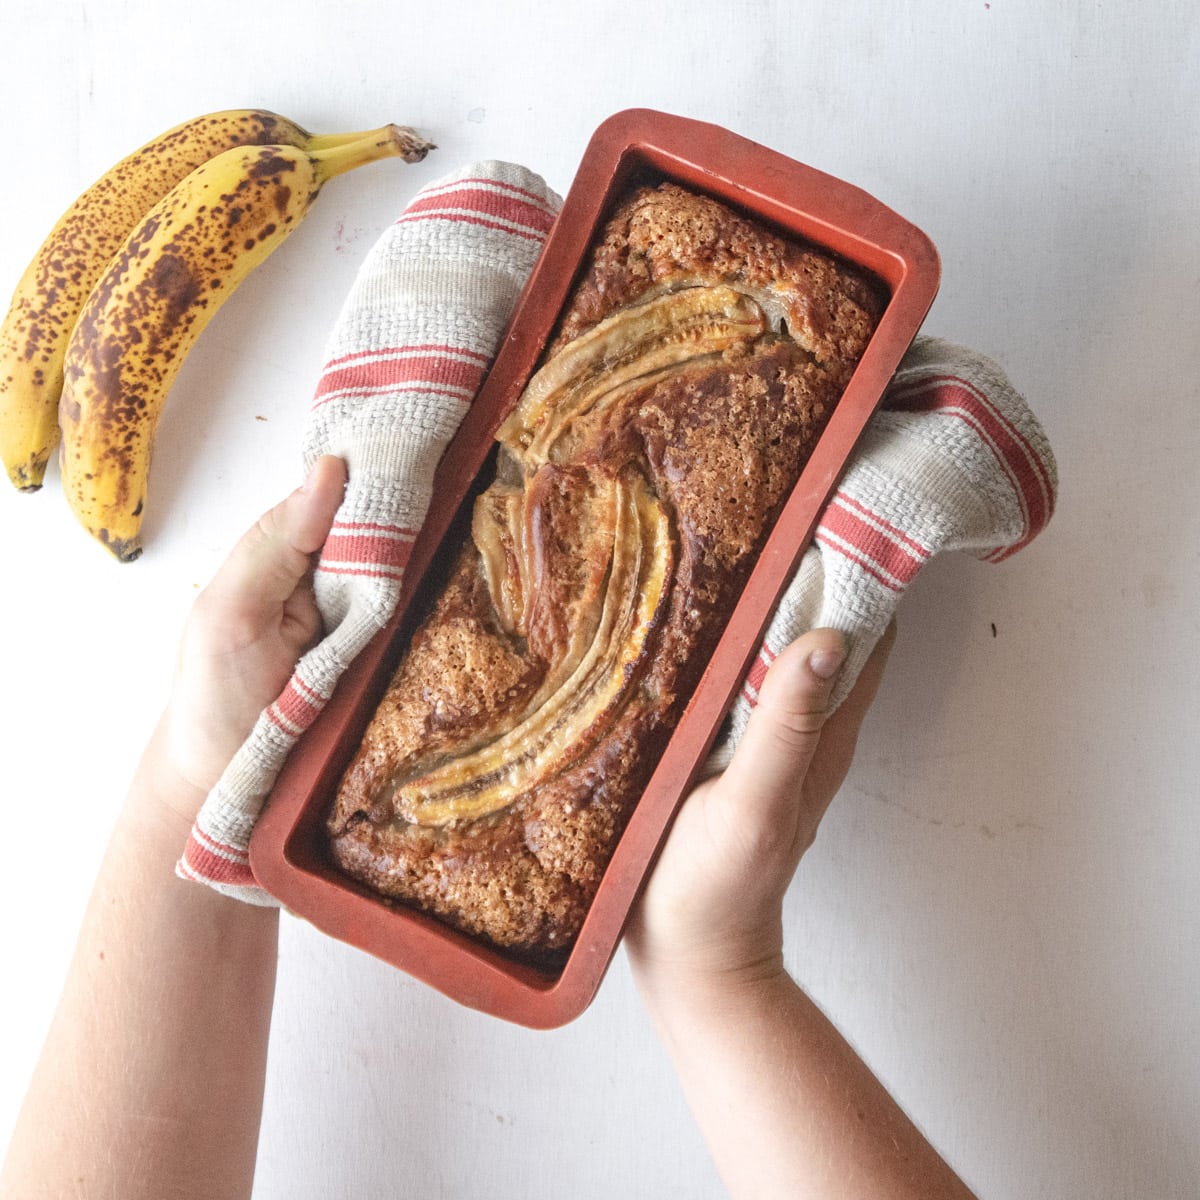 top view of a freshly baked banana loaf held up by 2 hands